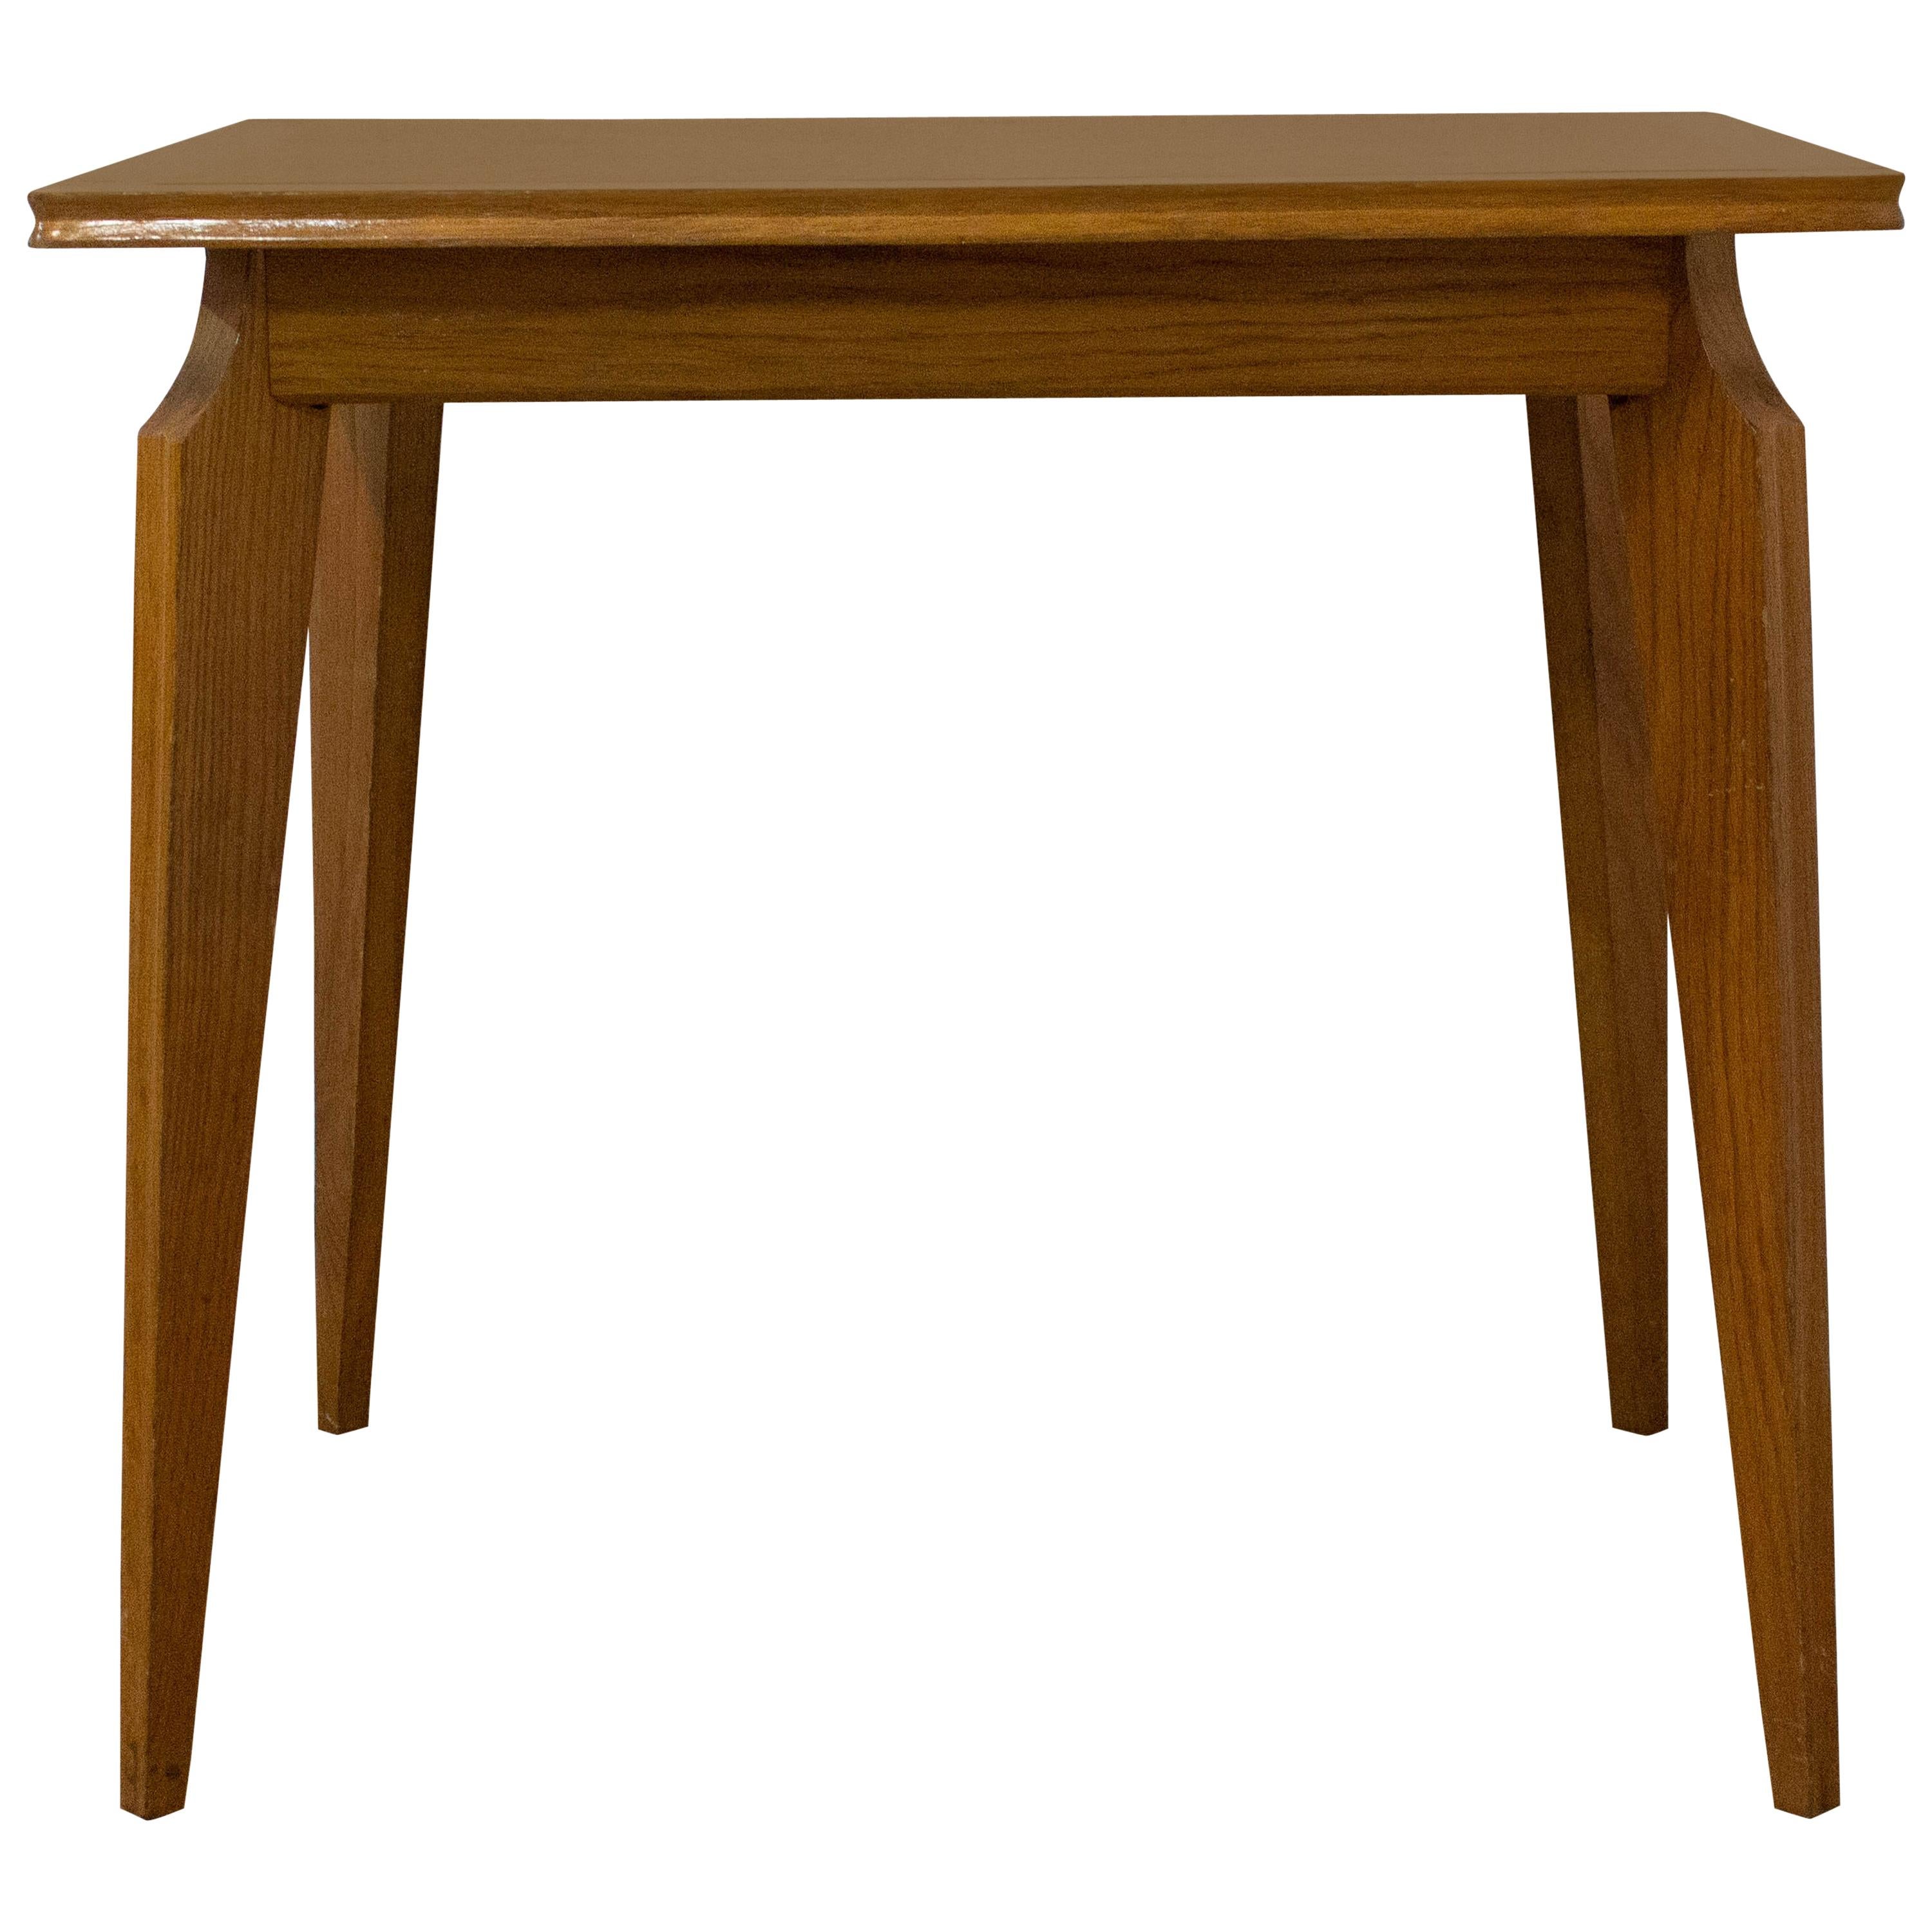 French Writing Table, Desk or Side Table Midcentury